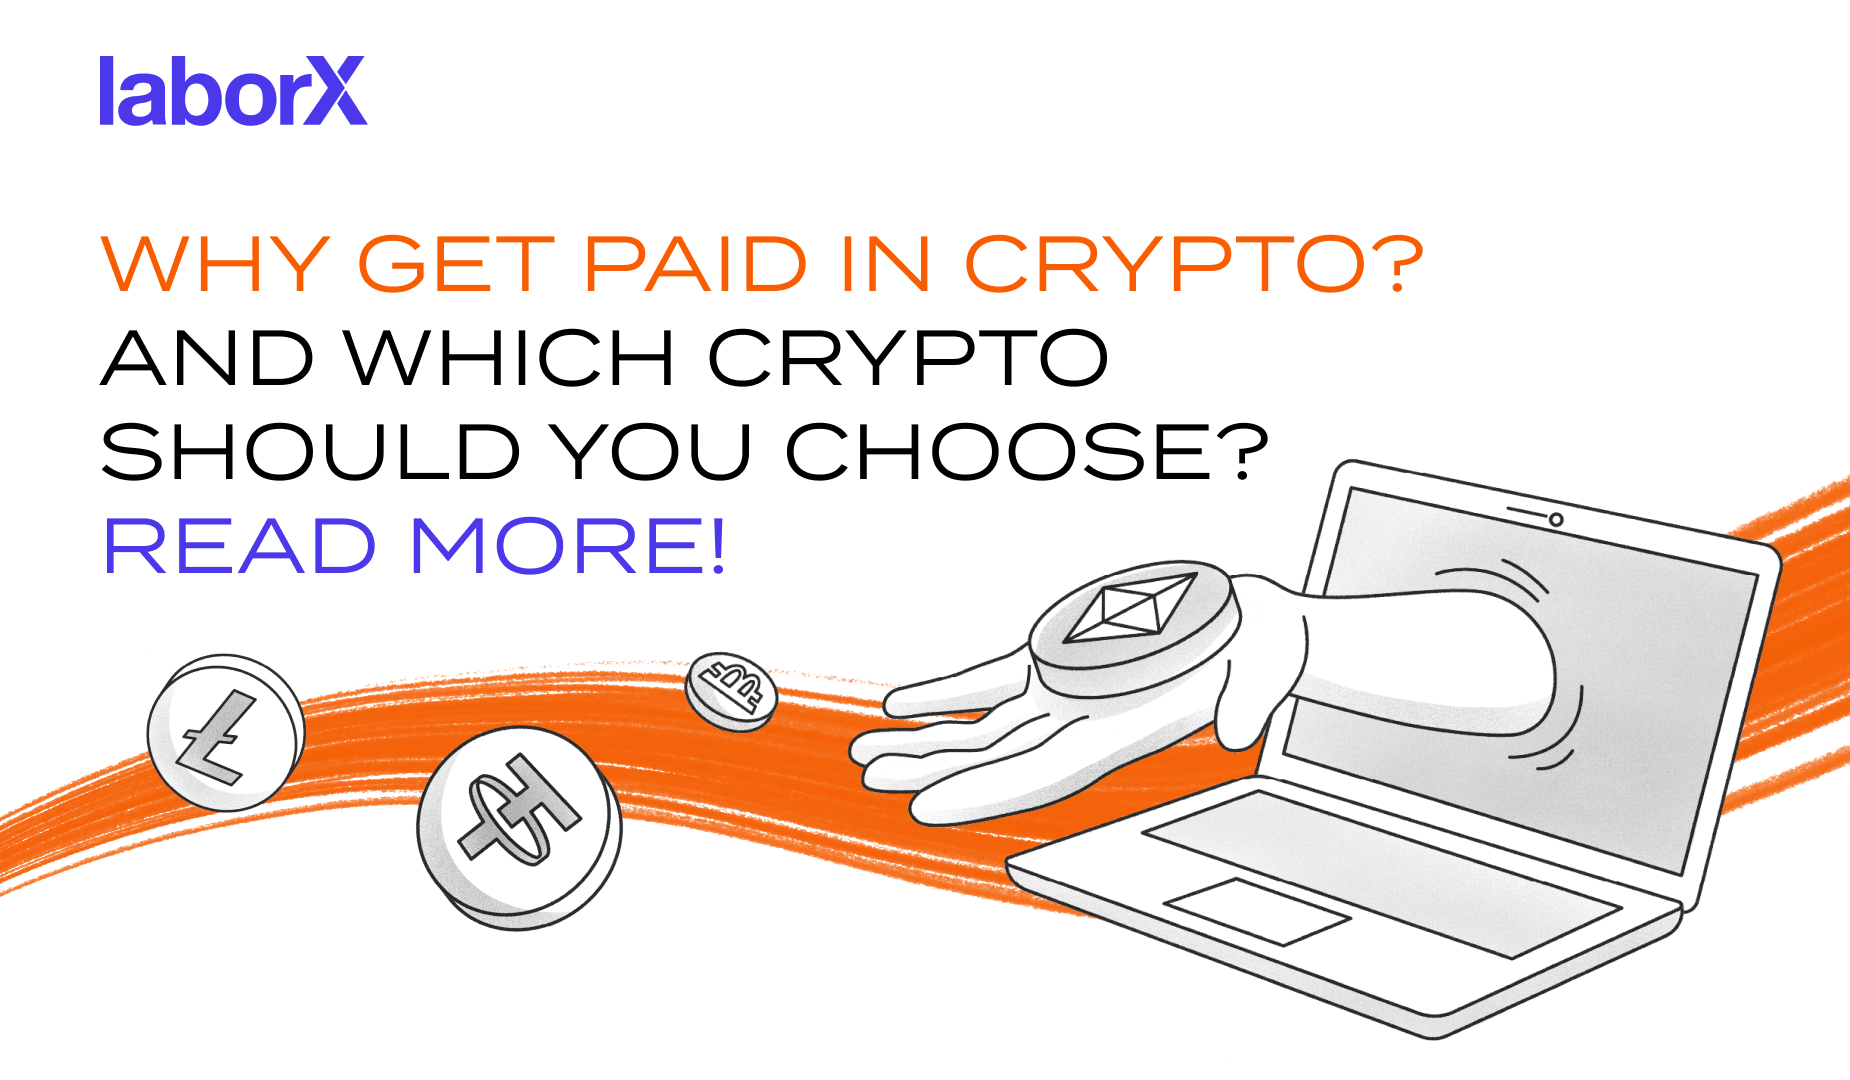 Why Get Paid In Crypto? And Which Crypto Should You Choose?